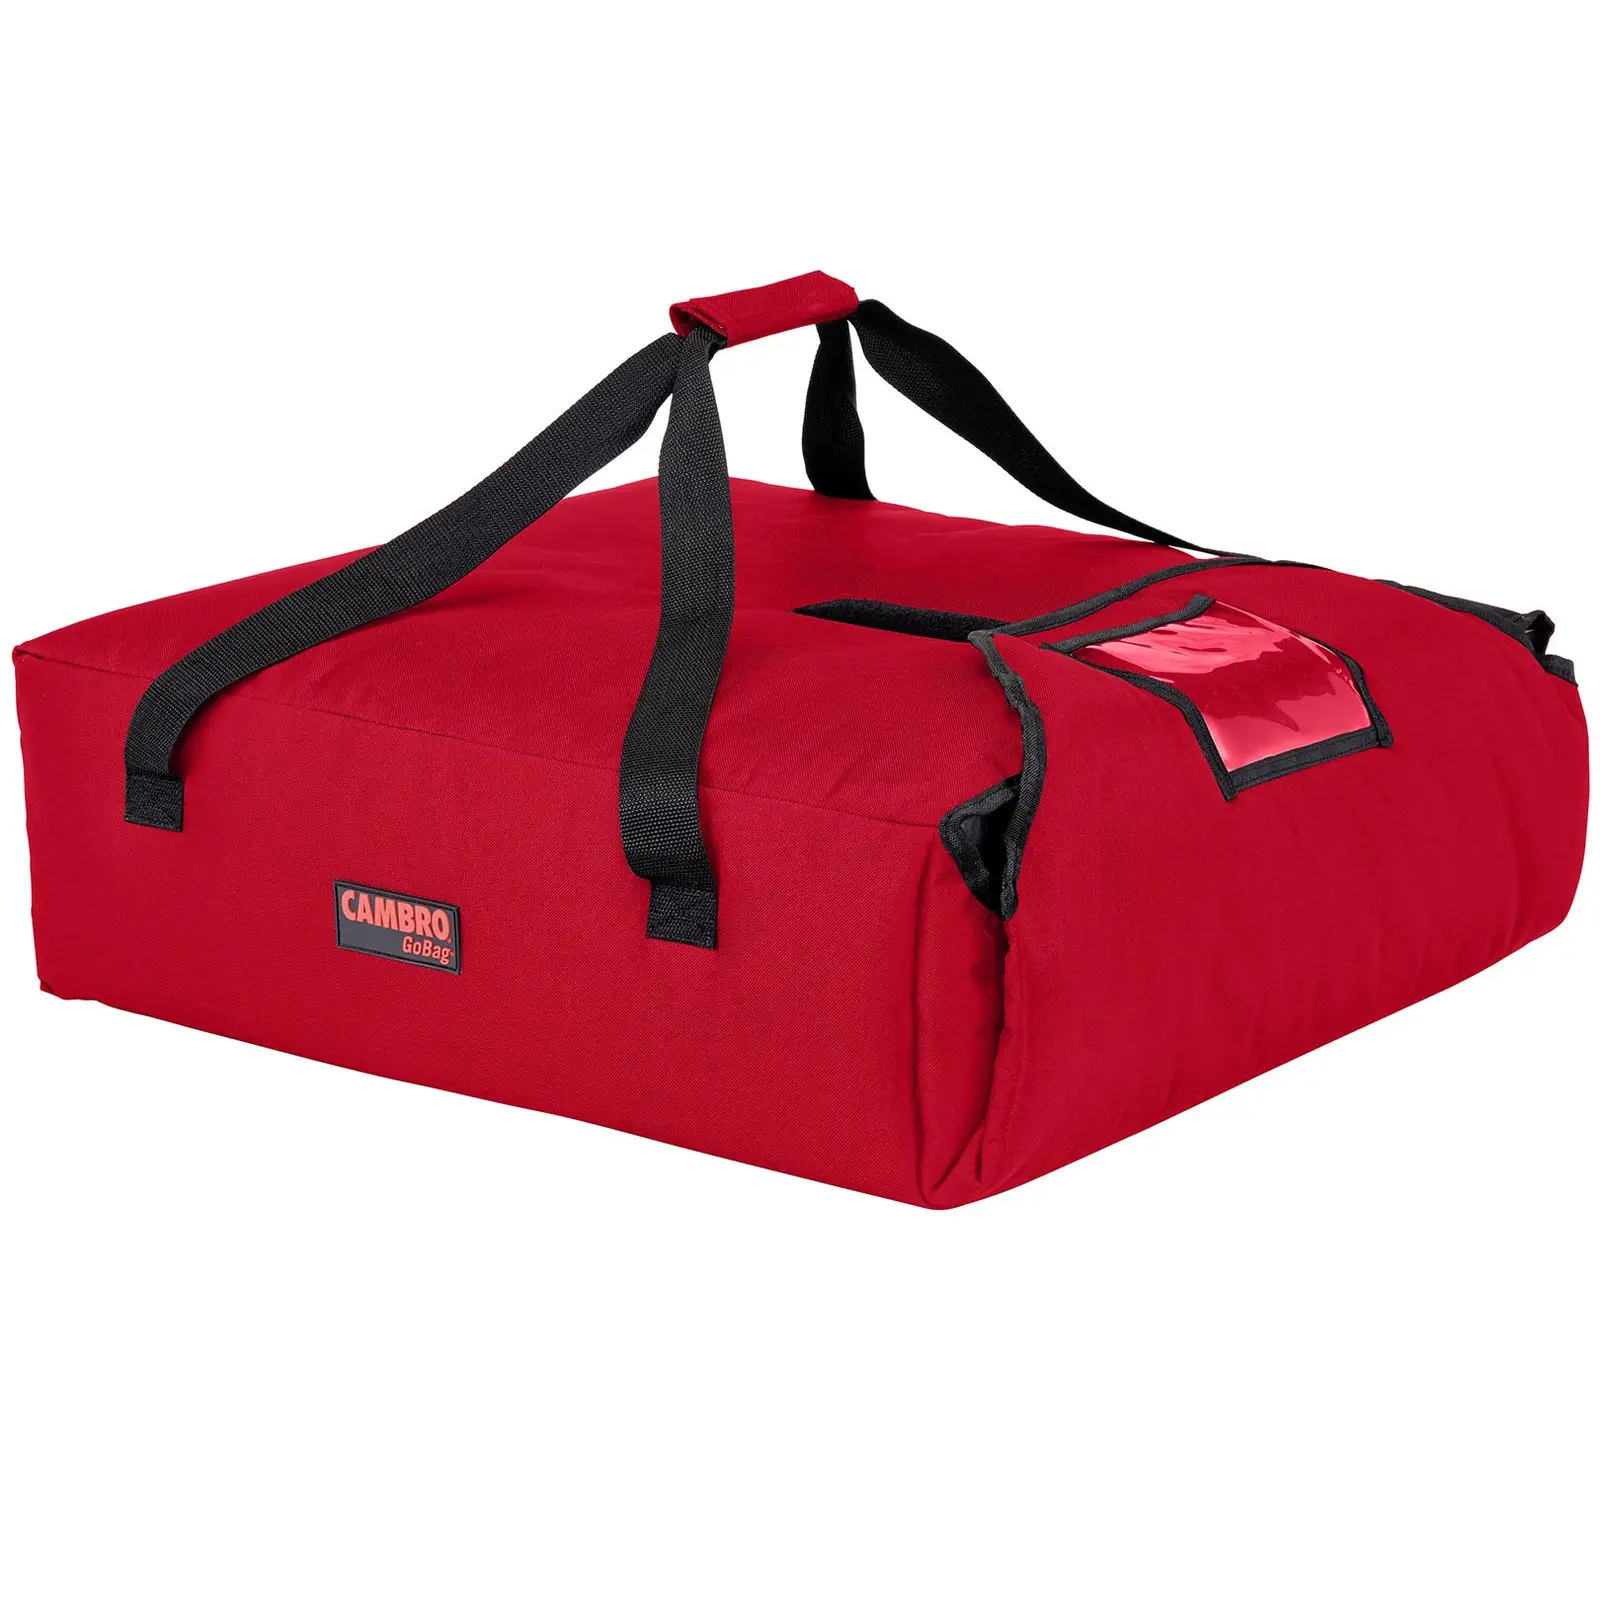 Pizza Delivery Bag - 43 x 55 x 16.5 cm - Red